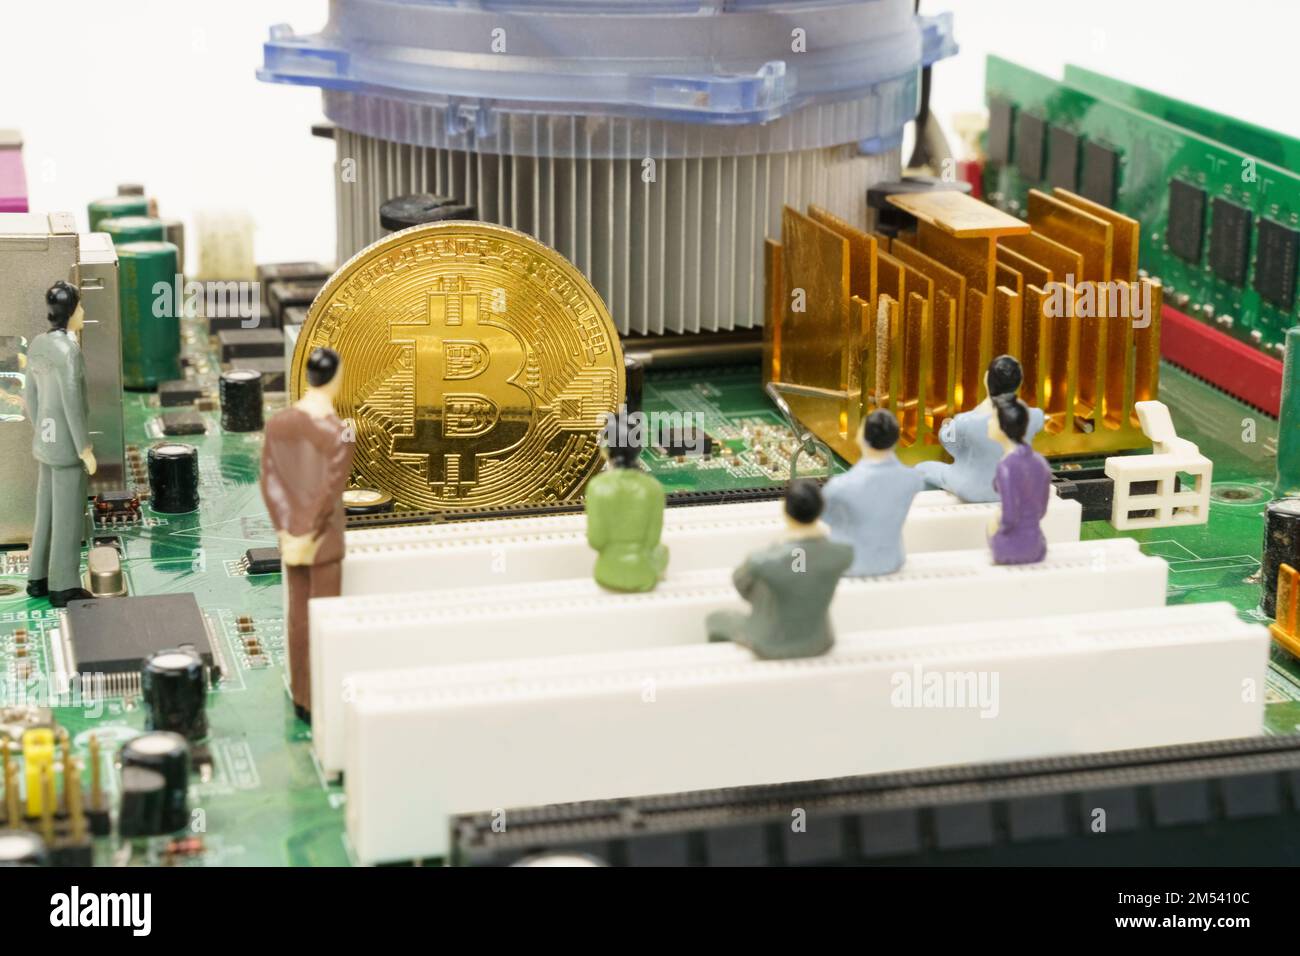 Business and technology concept. On the motherboard of the computer is a gold bitcoin coin and miniature figures of people. Figures out of focus. Stock Photo